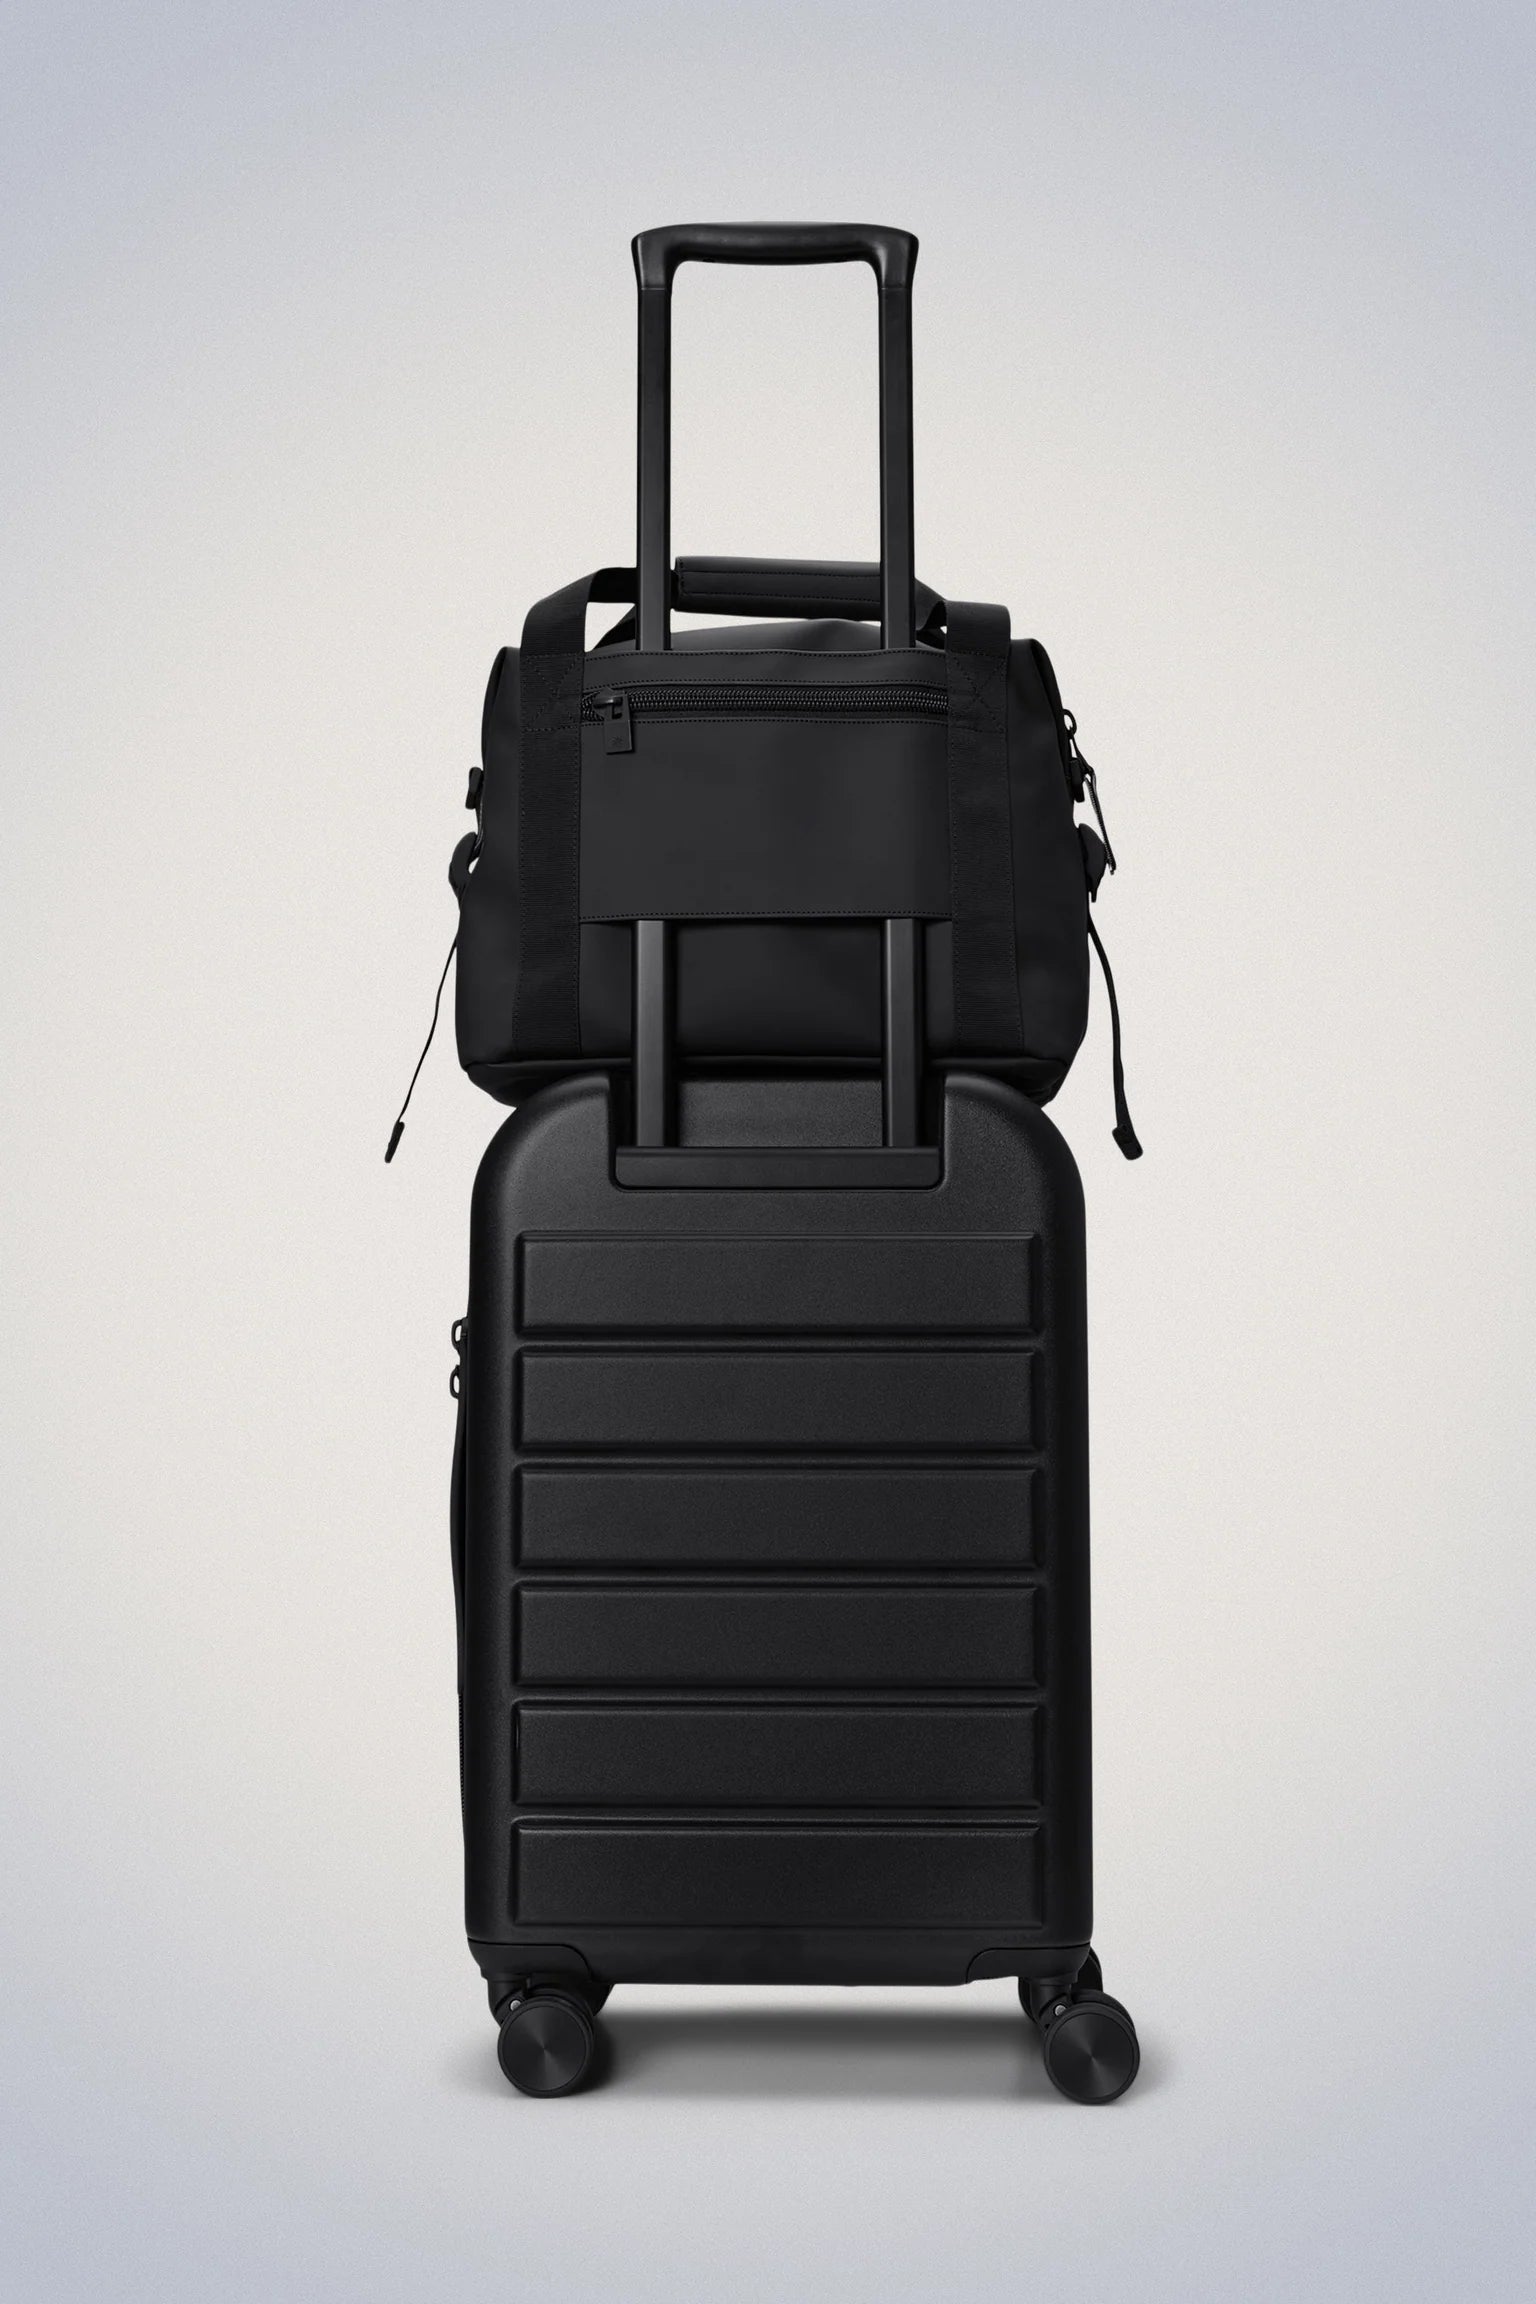 A Rains Texel Kit Bag, a black travel bag with wheels on a white background.